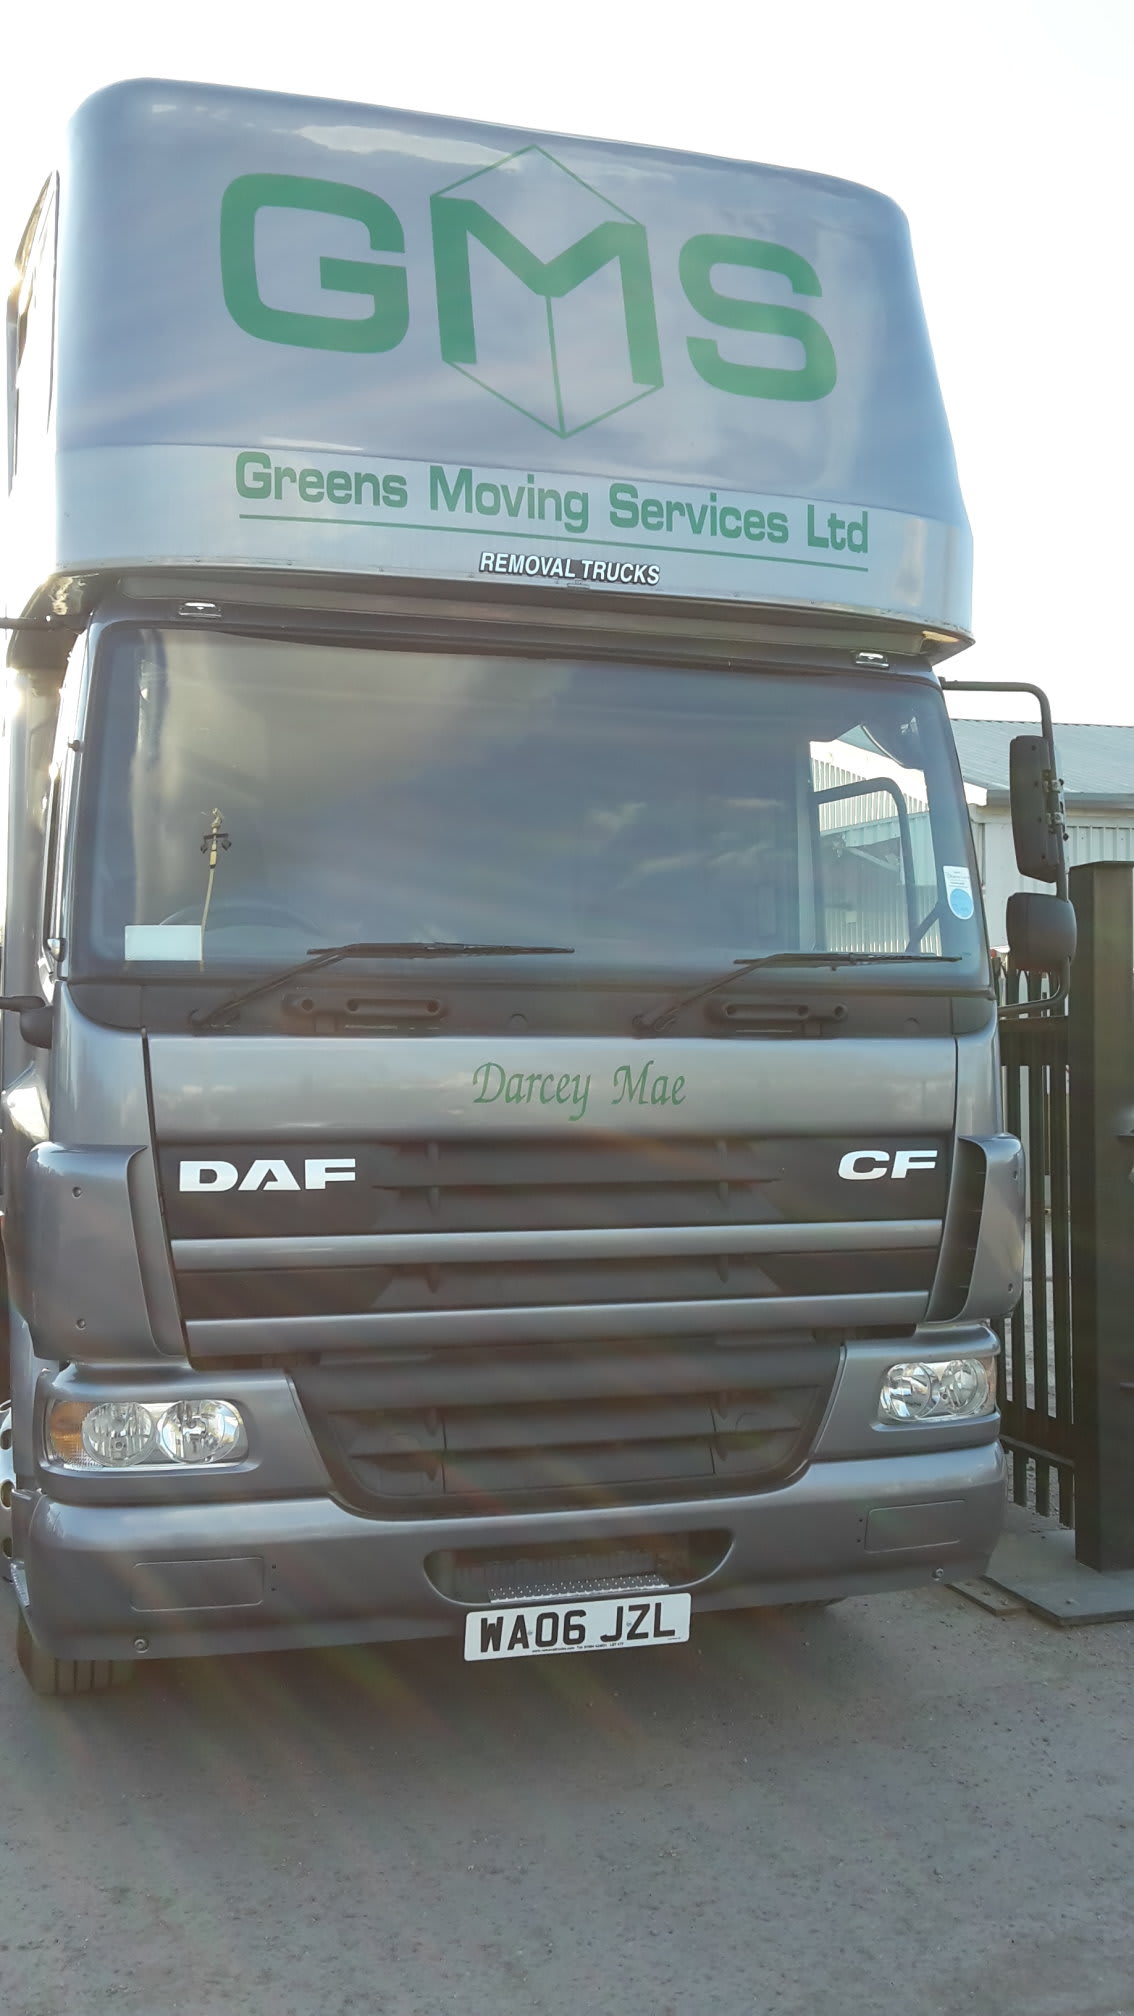 Greens Moving Services Ltd Didcot 01235 250048